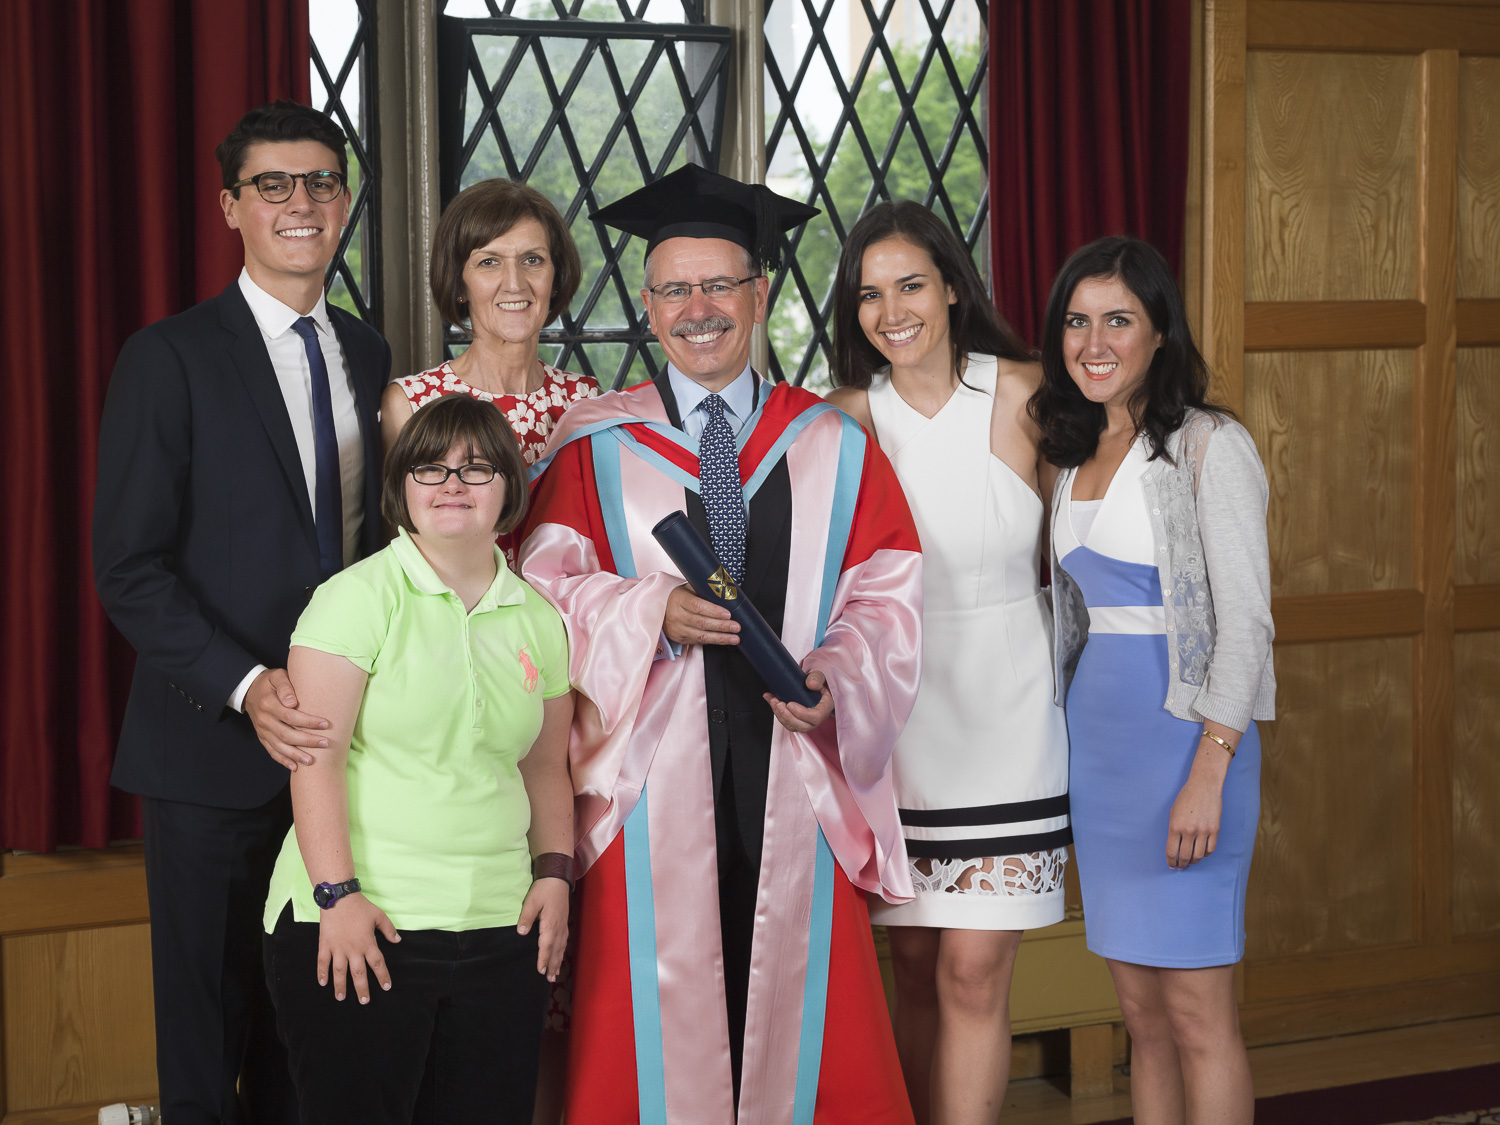 Shaun and his wife, Mary, surrounded by their children, left to right, Timothy, Lauren, Natalie and Rachel.